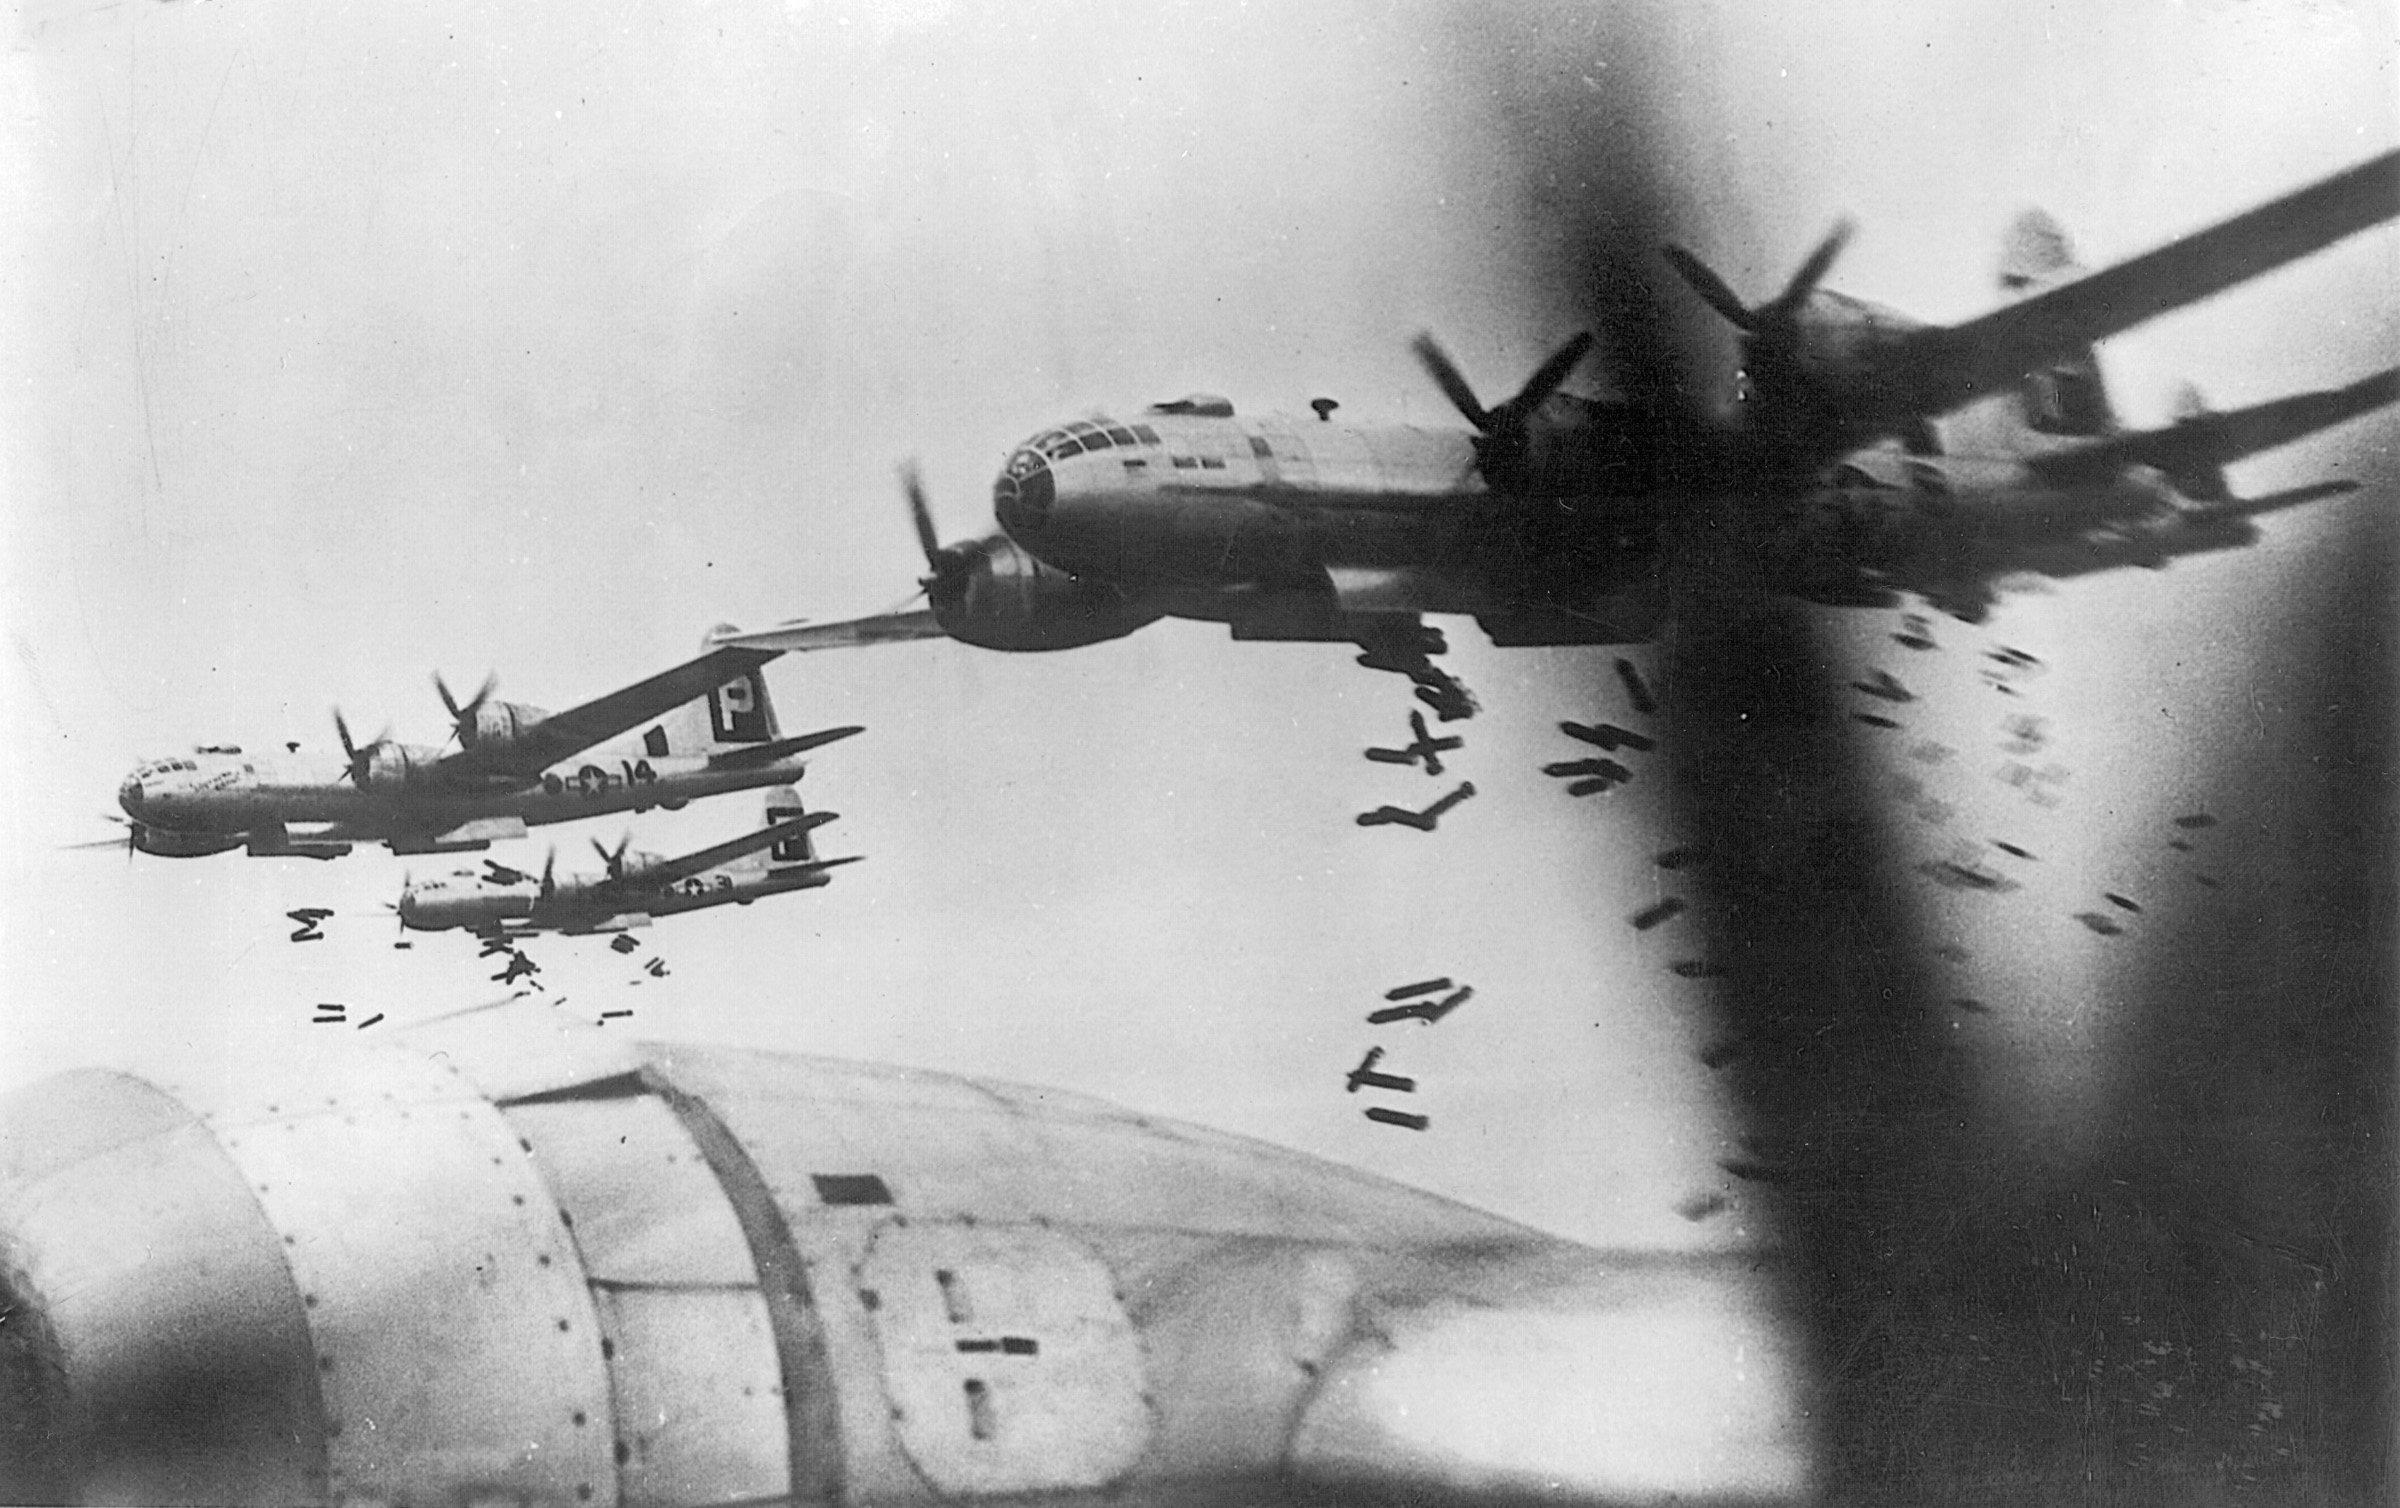 More than 450 B-29s took part in a major raid on Yokohama. The bombers released incendiary and fragmentation ordnance over an area of 6.9 square miles.